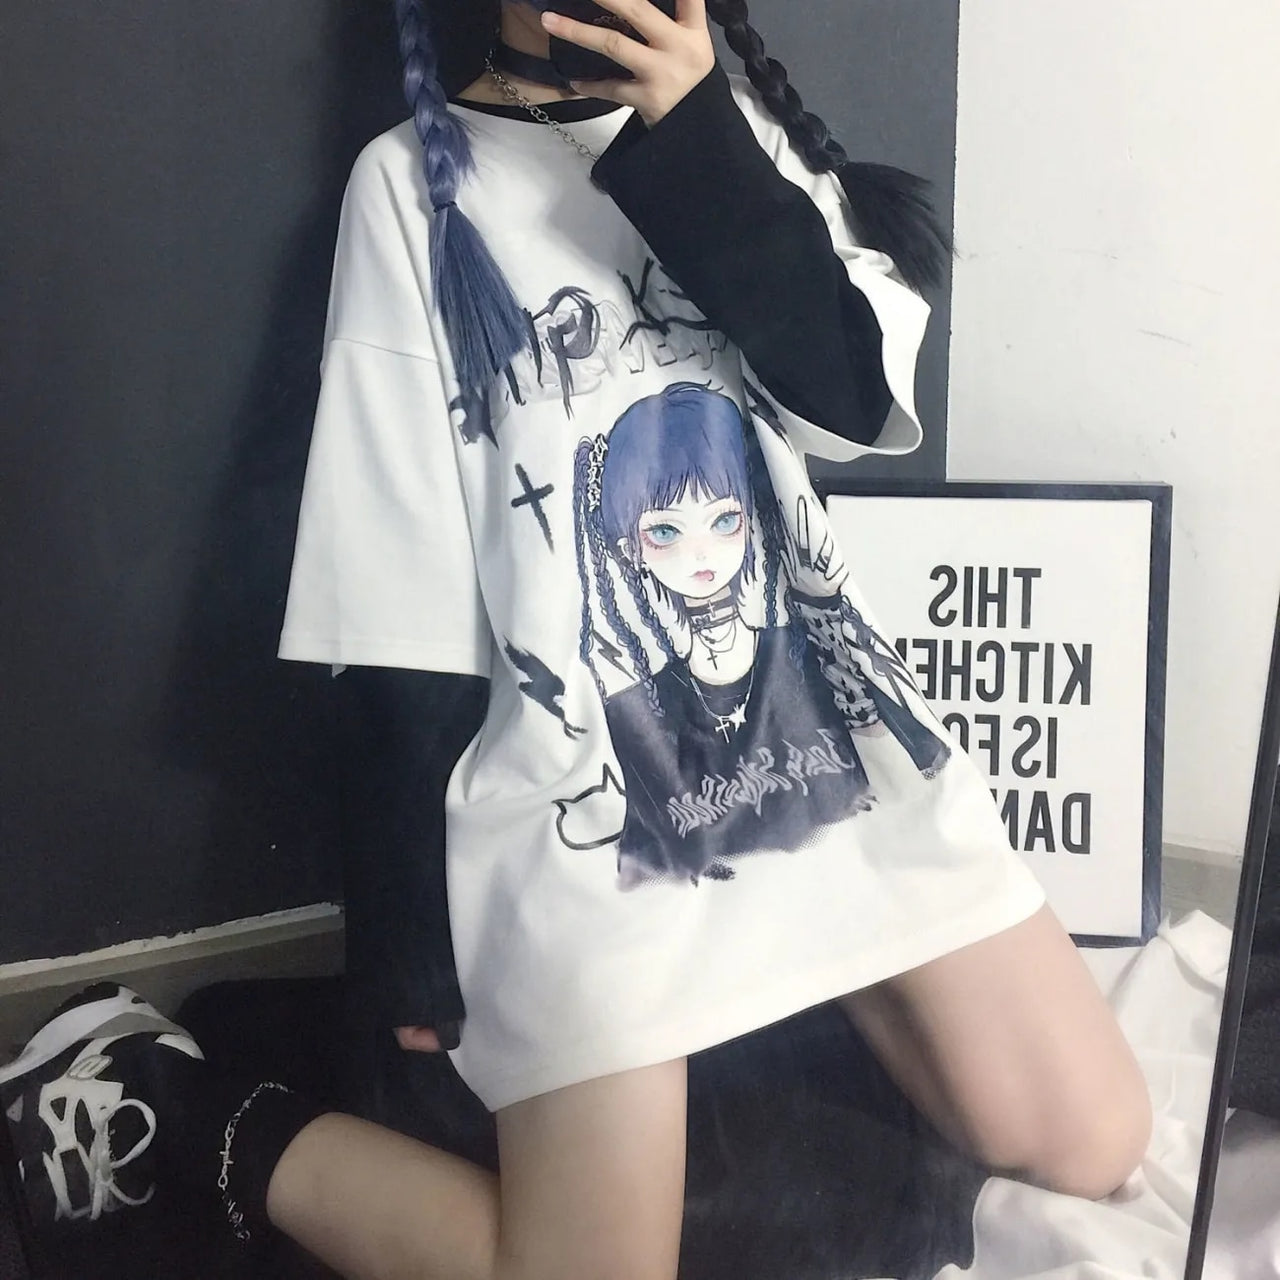 Gothic Anime Girl Loose T-Shirt